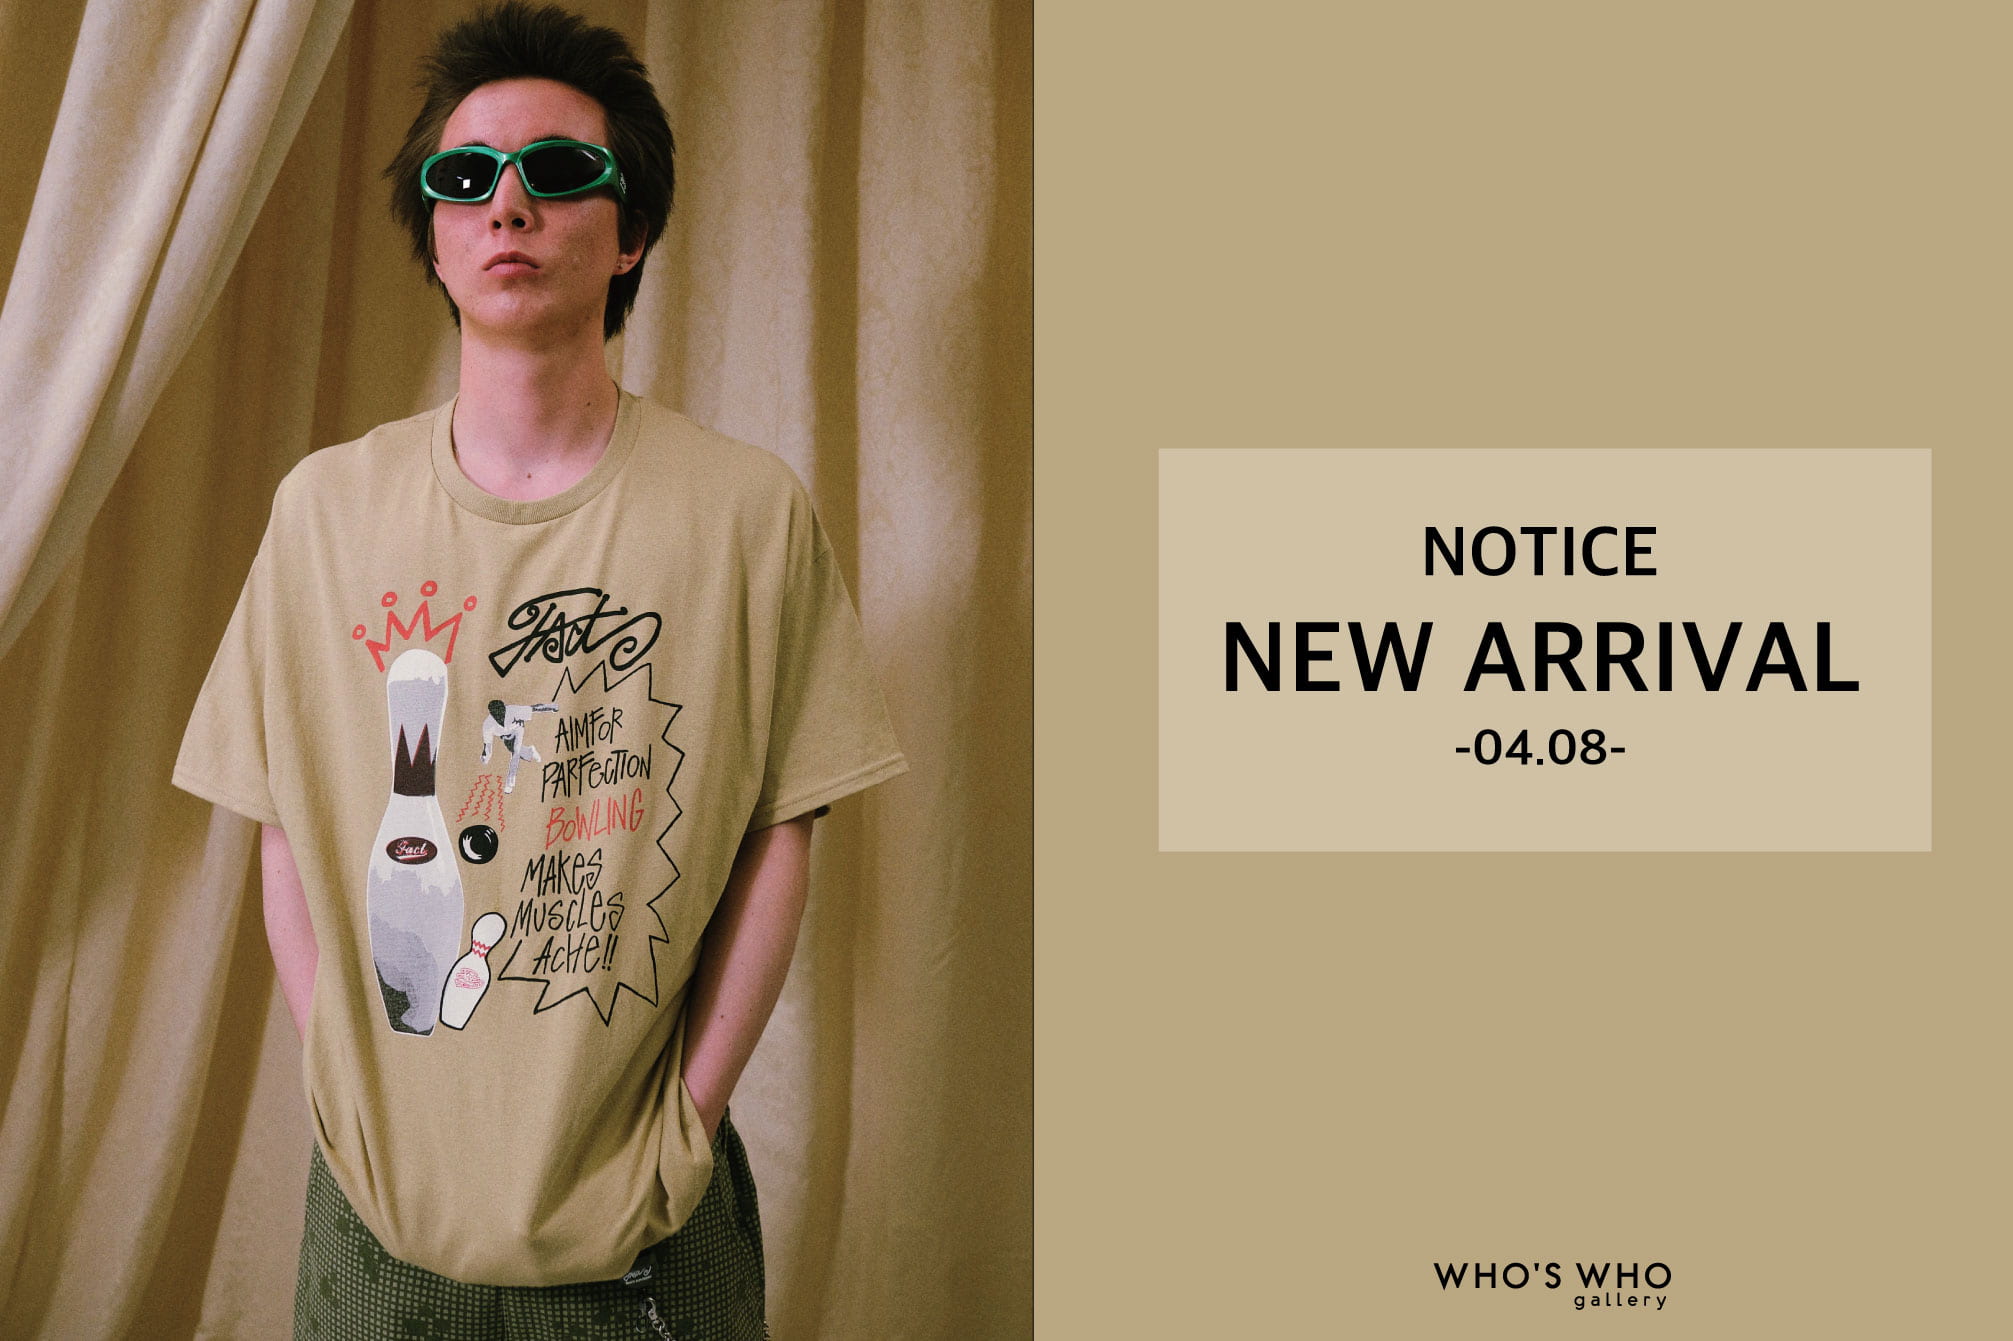 WHO’S WHO gallery 【NEW ARRIVAL NOTICE -04.08-】